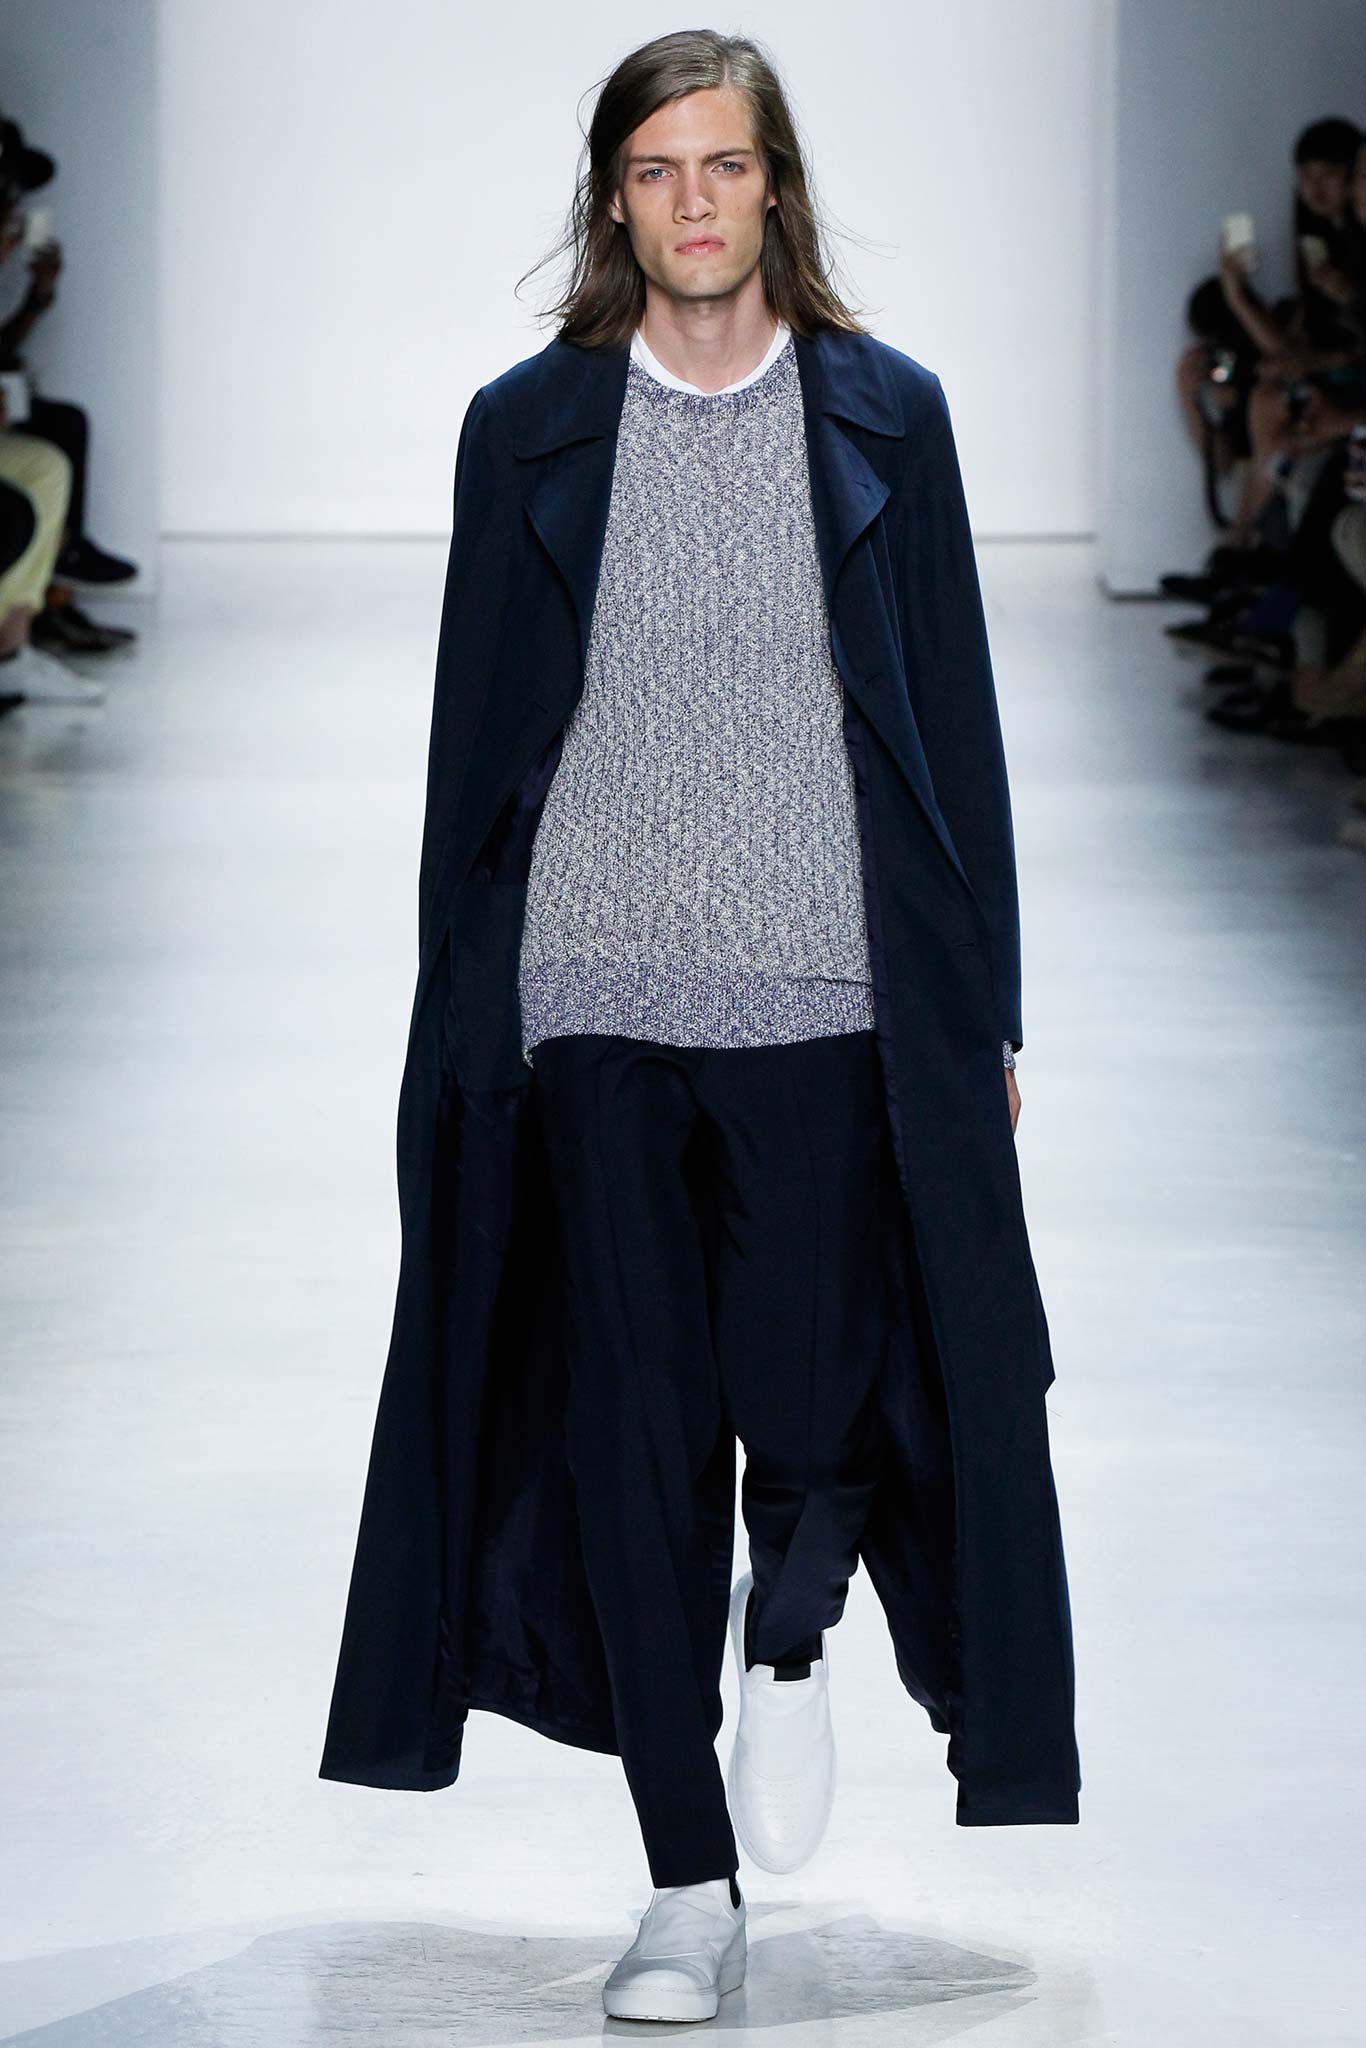 NYFW: Ovadia & Sons Spring/Summer 2016 Collection